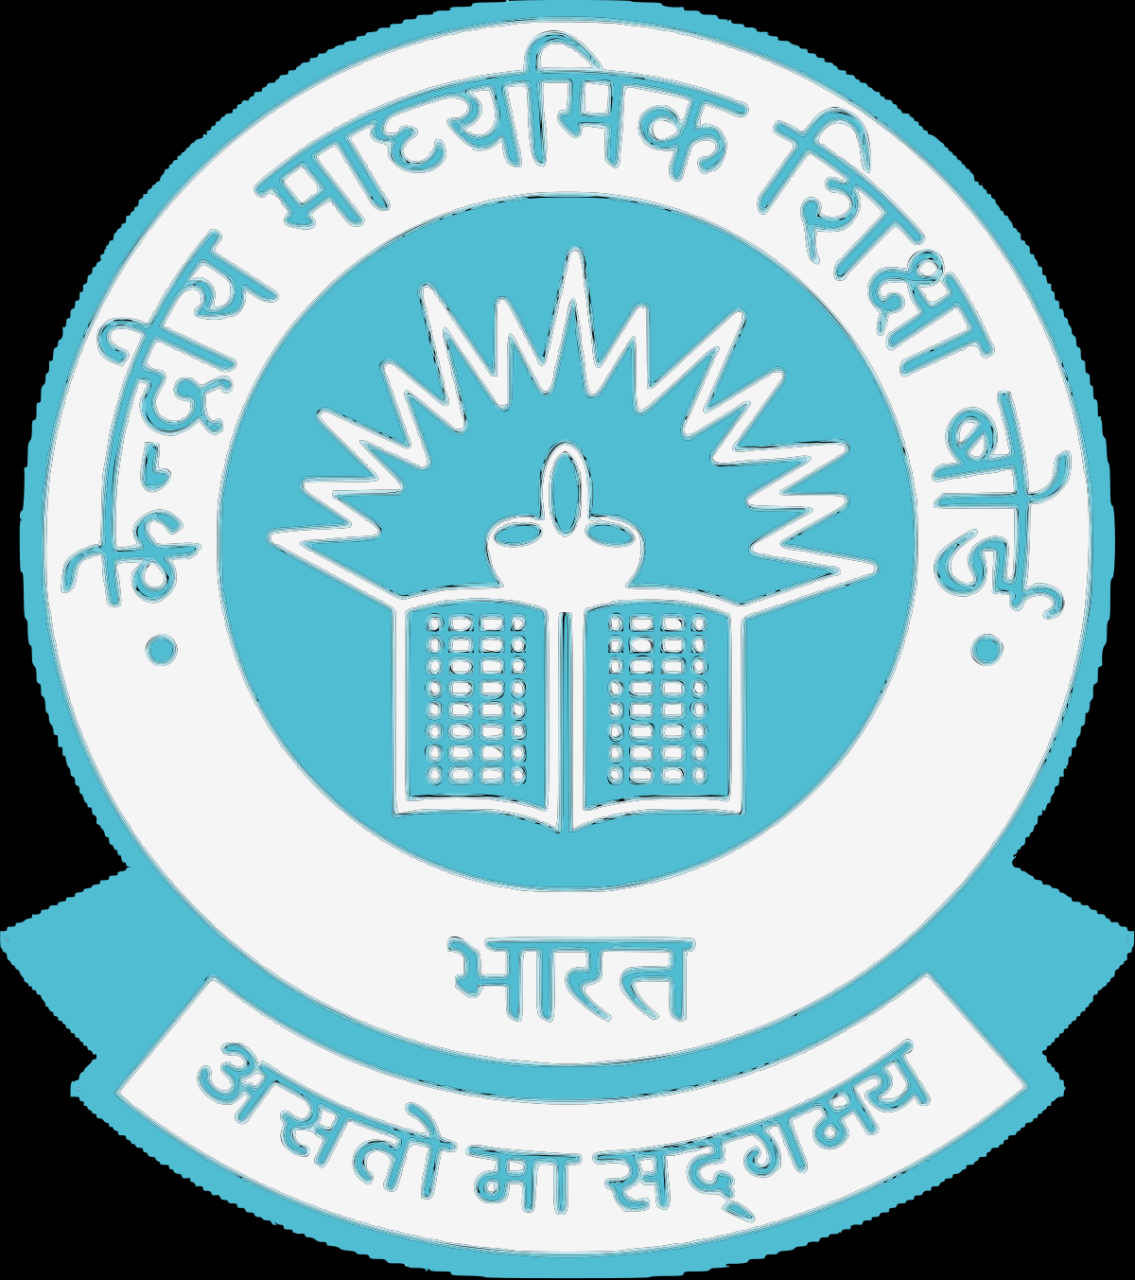 Central Board Of Secondary Education - Wikipedia